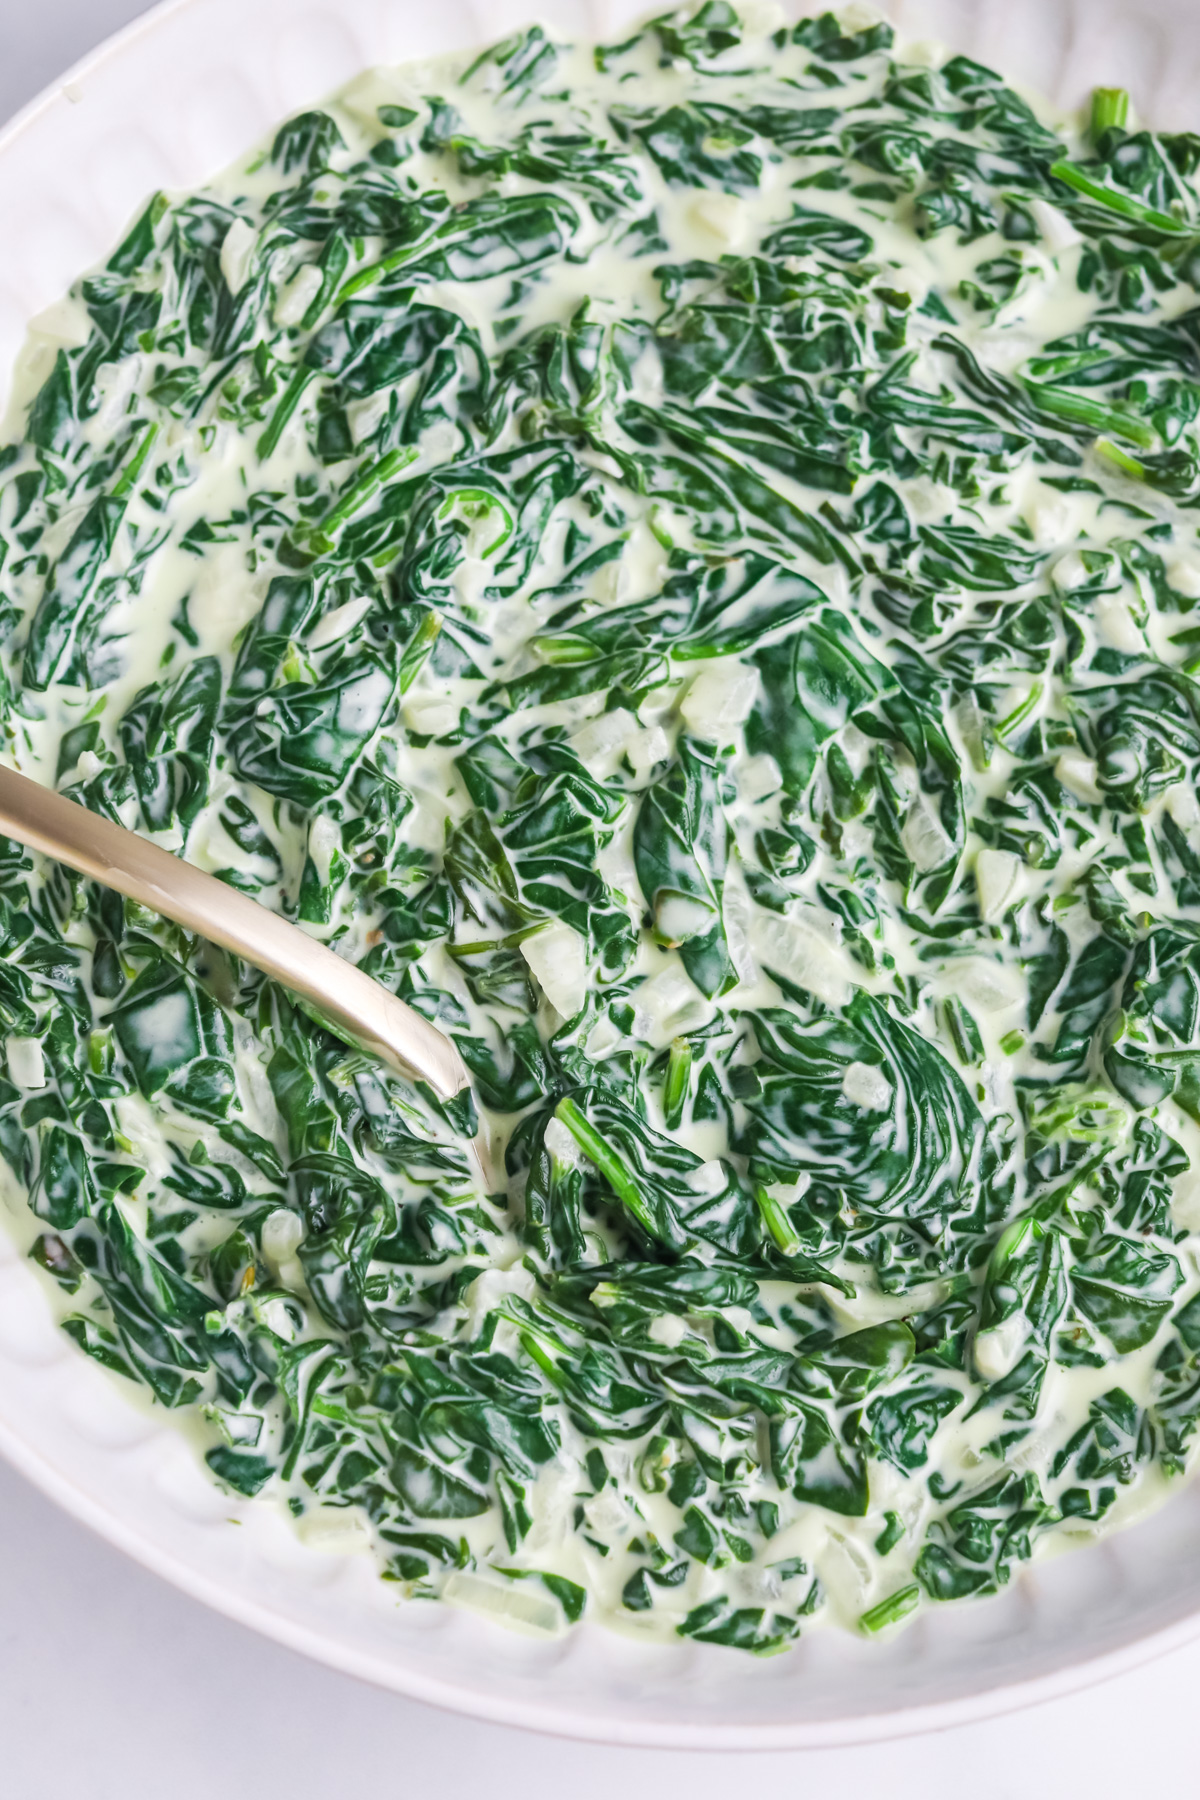 Creamed spinach being served.